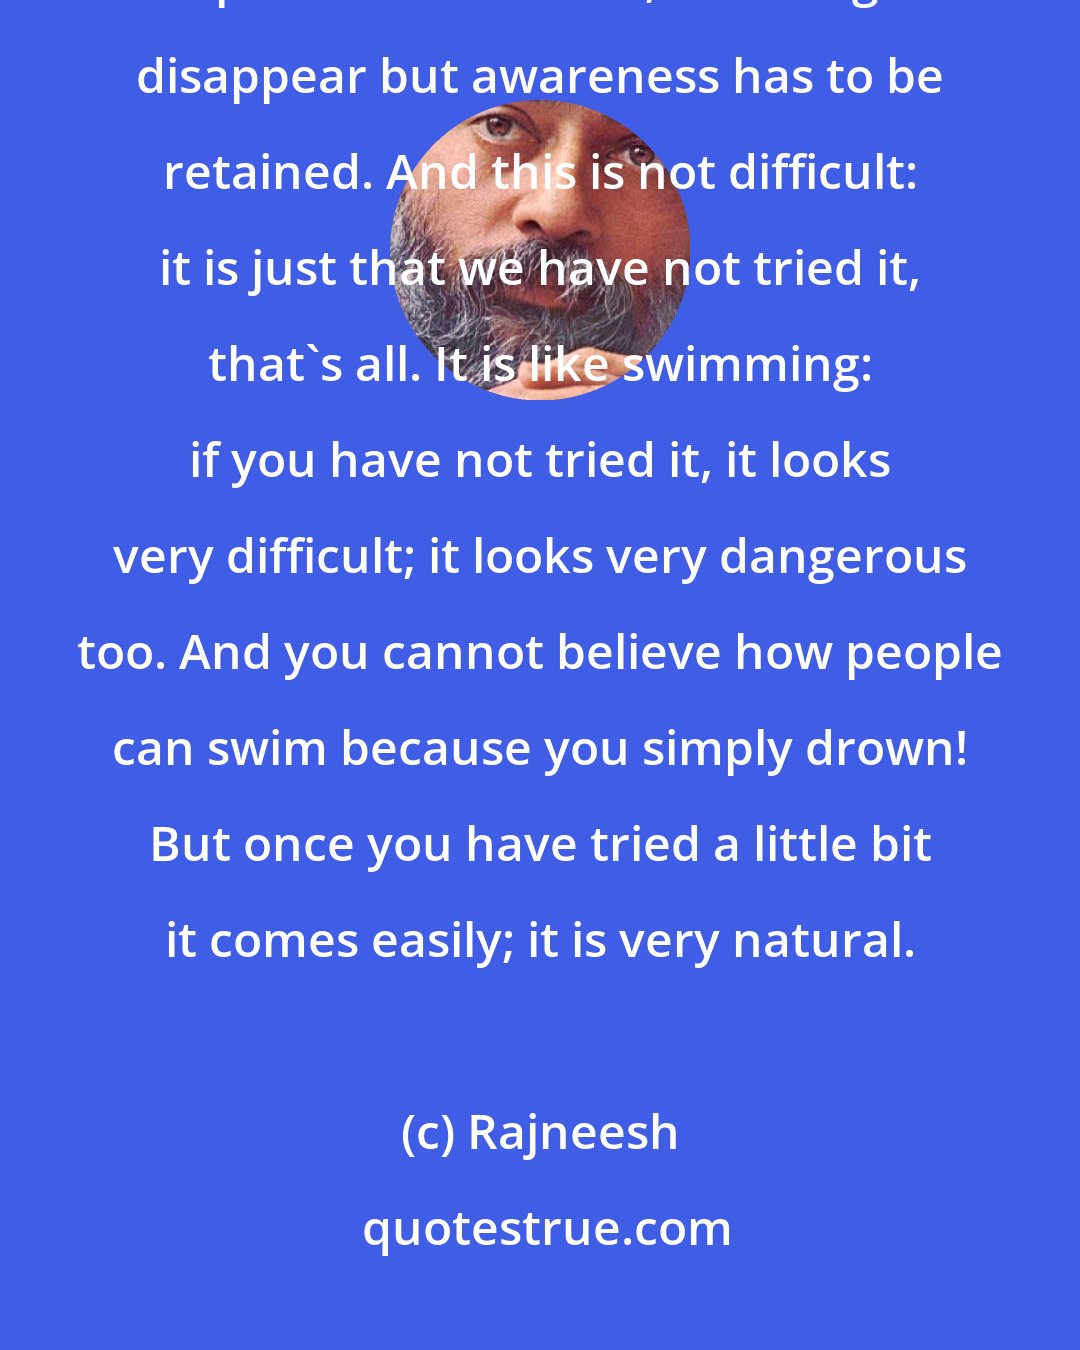 Rajneesh: Meditation means: remain as relaxed as you are in deep sleep and yet alert. Keep awareness there; let thoughts disappear but awareness has to be retained. And this is not difficult: it is just that we have not tried it, that's all. It is like swimming: if you have not tried it, it looks very difficult; it looks very dangerous too. And you cannot believe how people can swim because you simply drown! But once you have tried a little bit it comes easily; it is very natural.